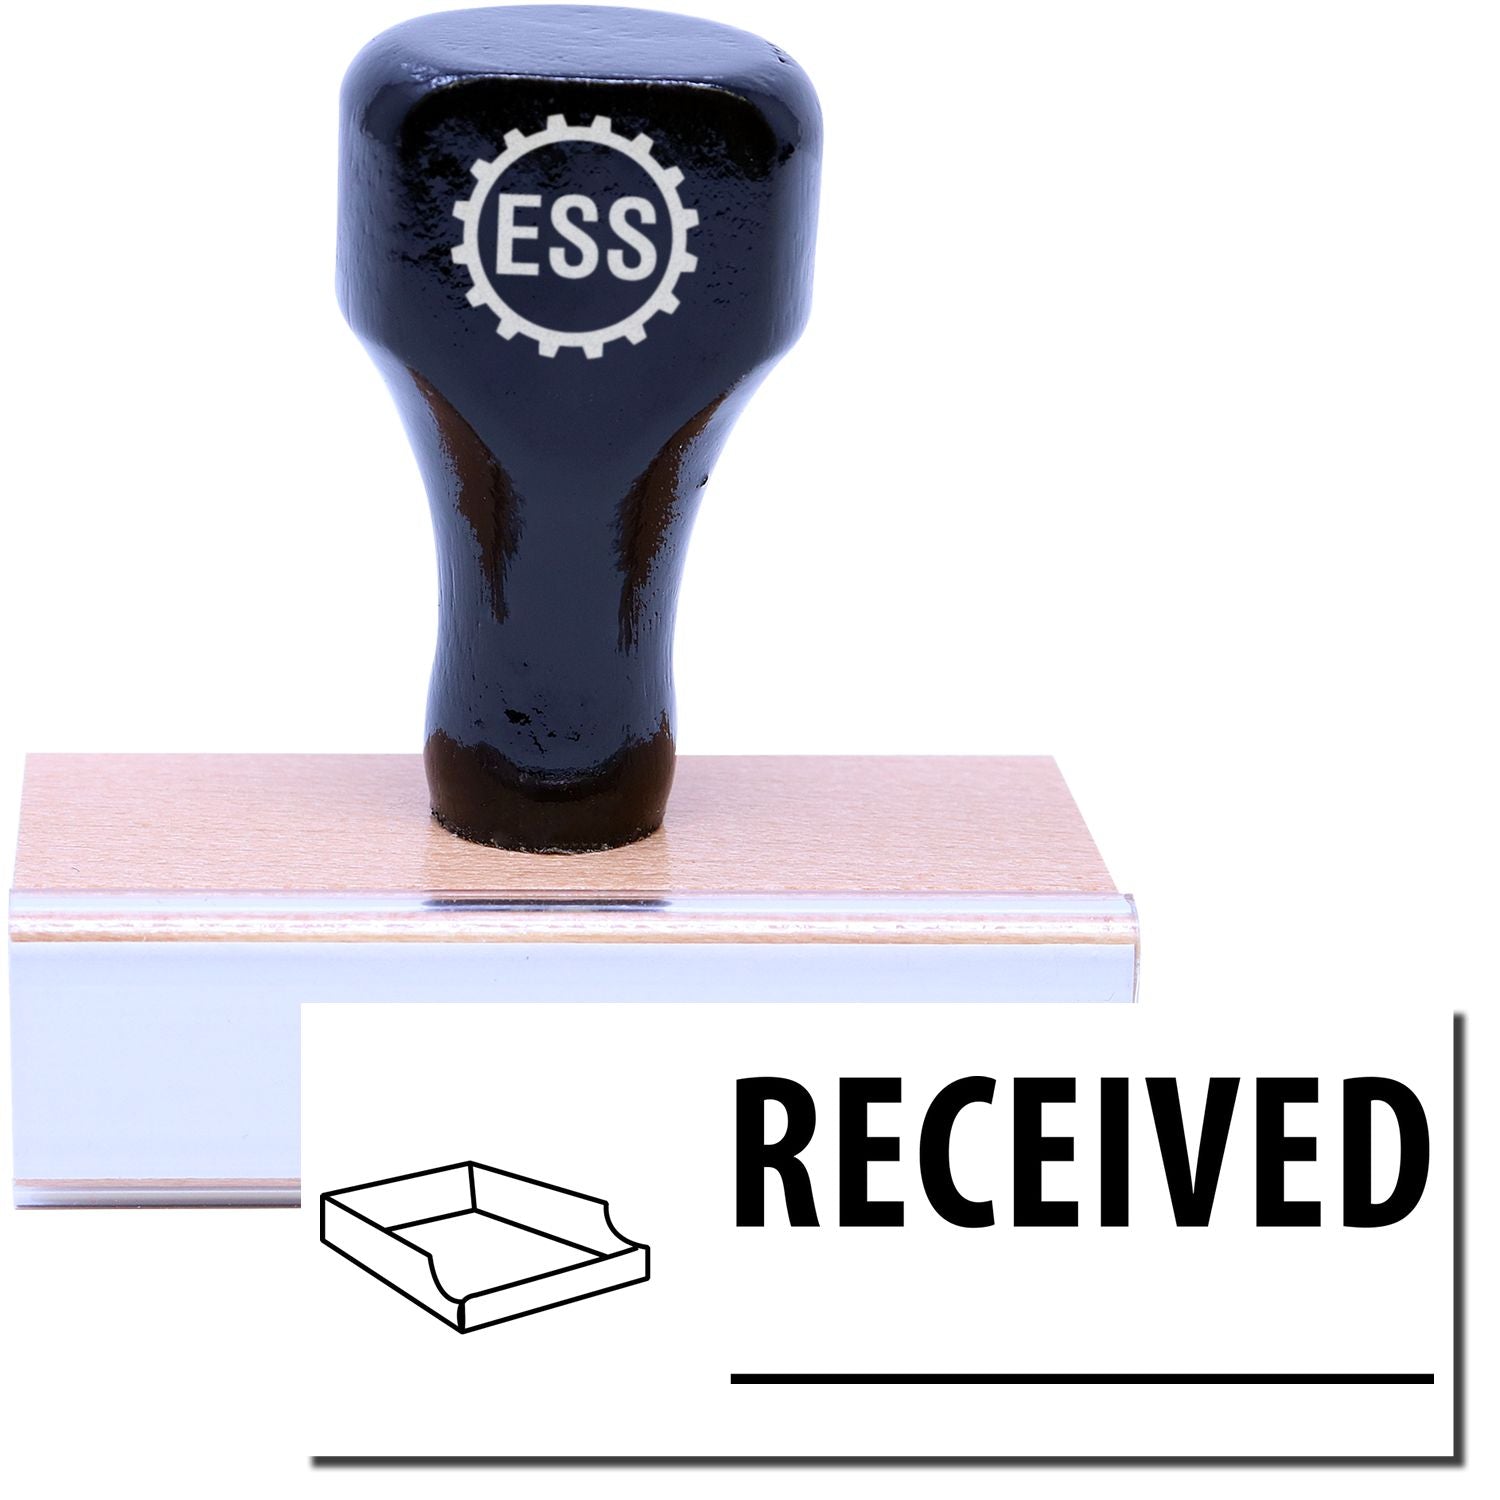 A stock office rubber stamp with a stamped image showing how the text "RECEIVED" in a large font with a line underneath the text and an inbox icon on the left side is displayed after stamping.